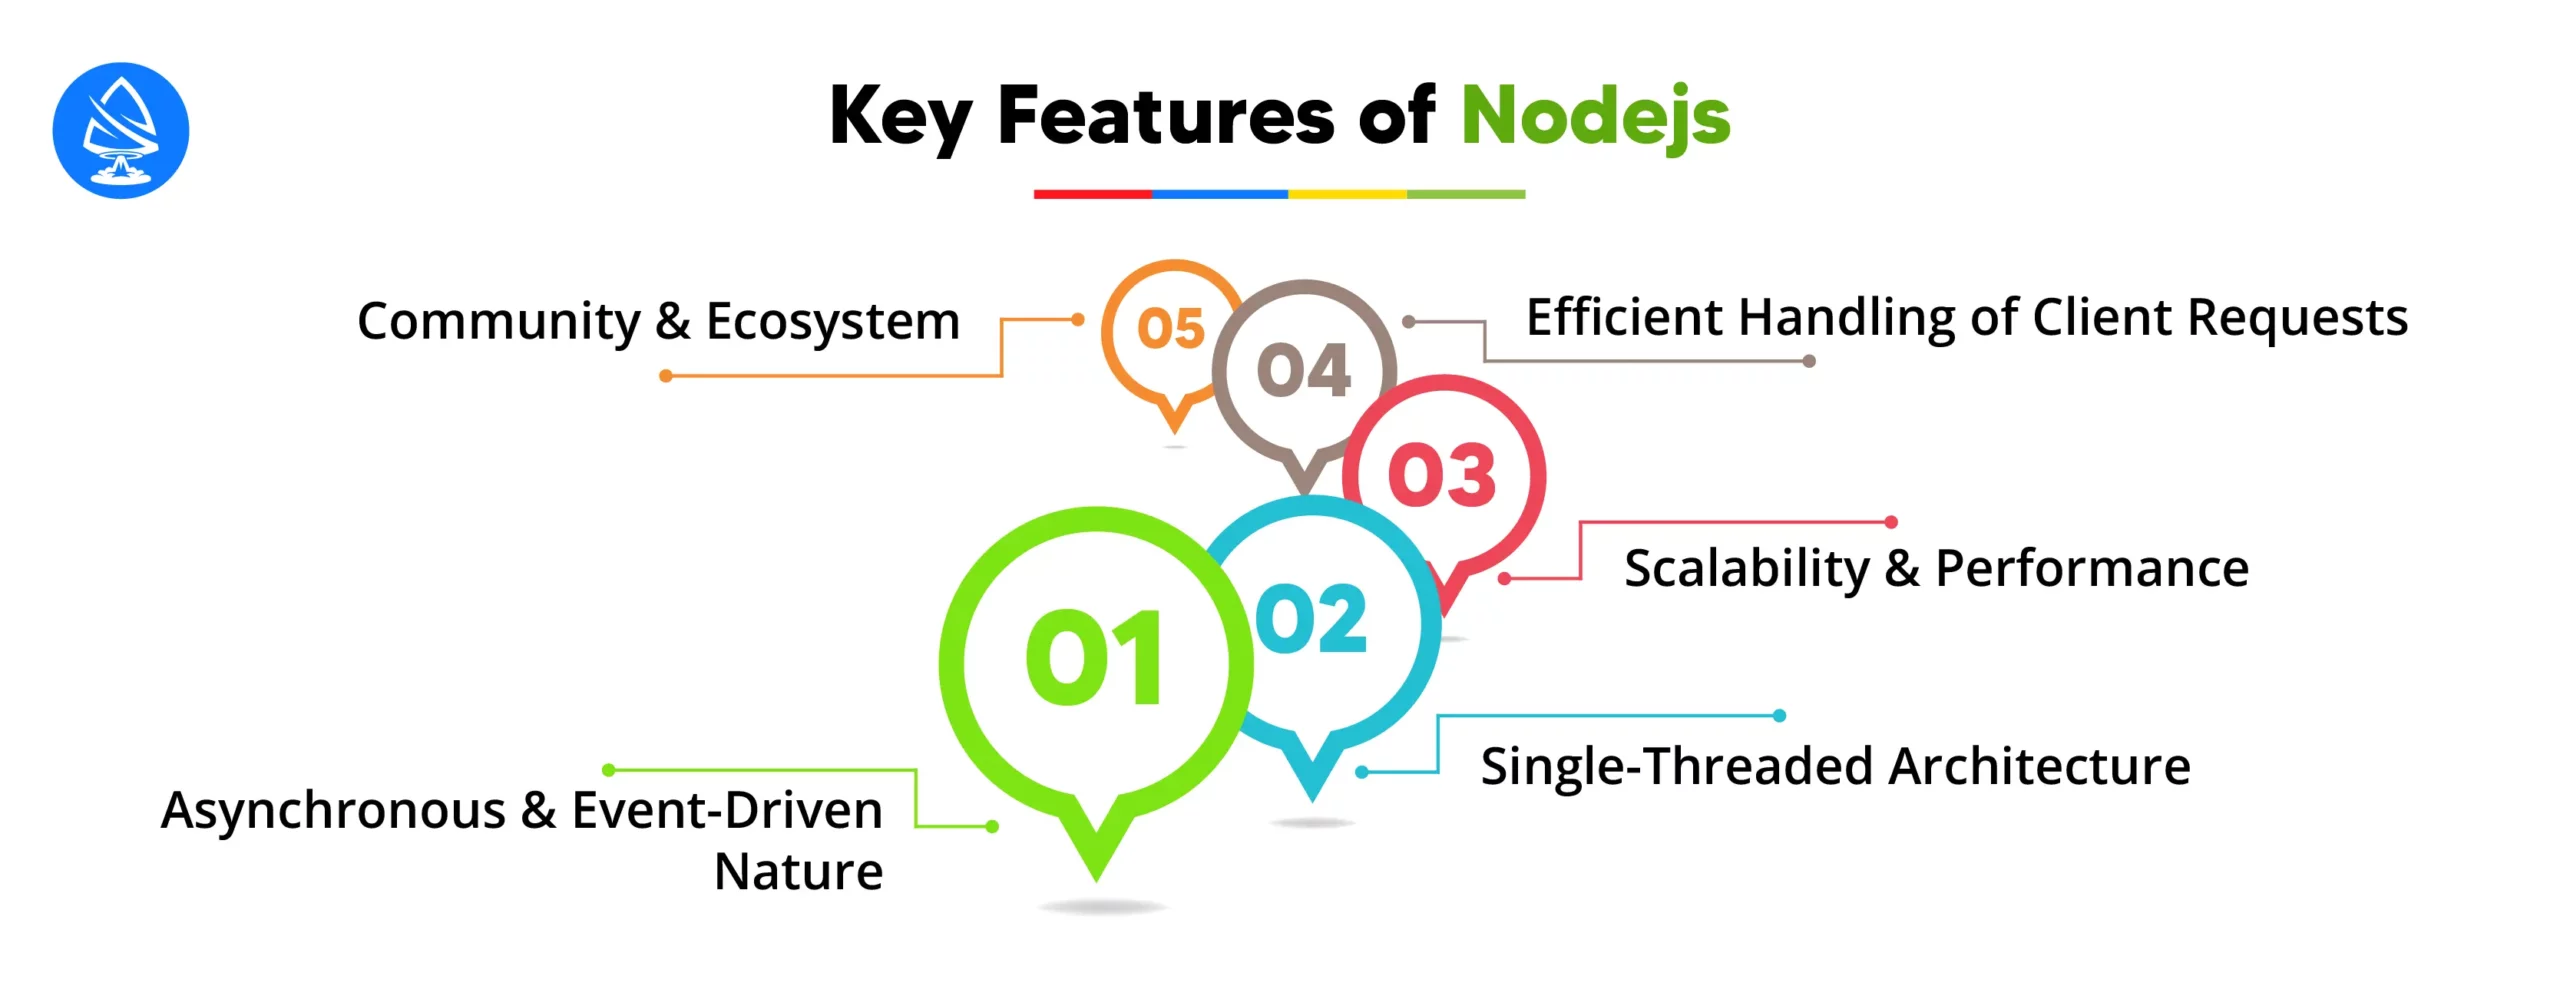 What are the key features of Nodejs? 